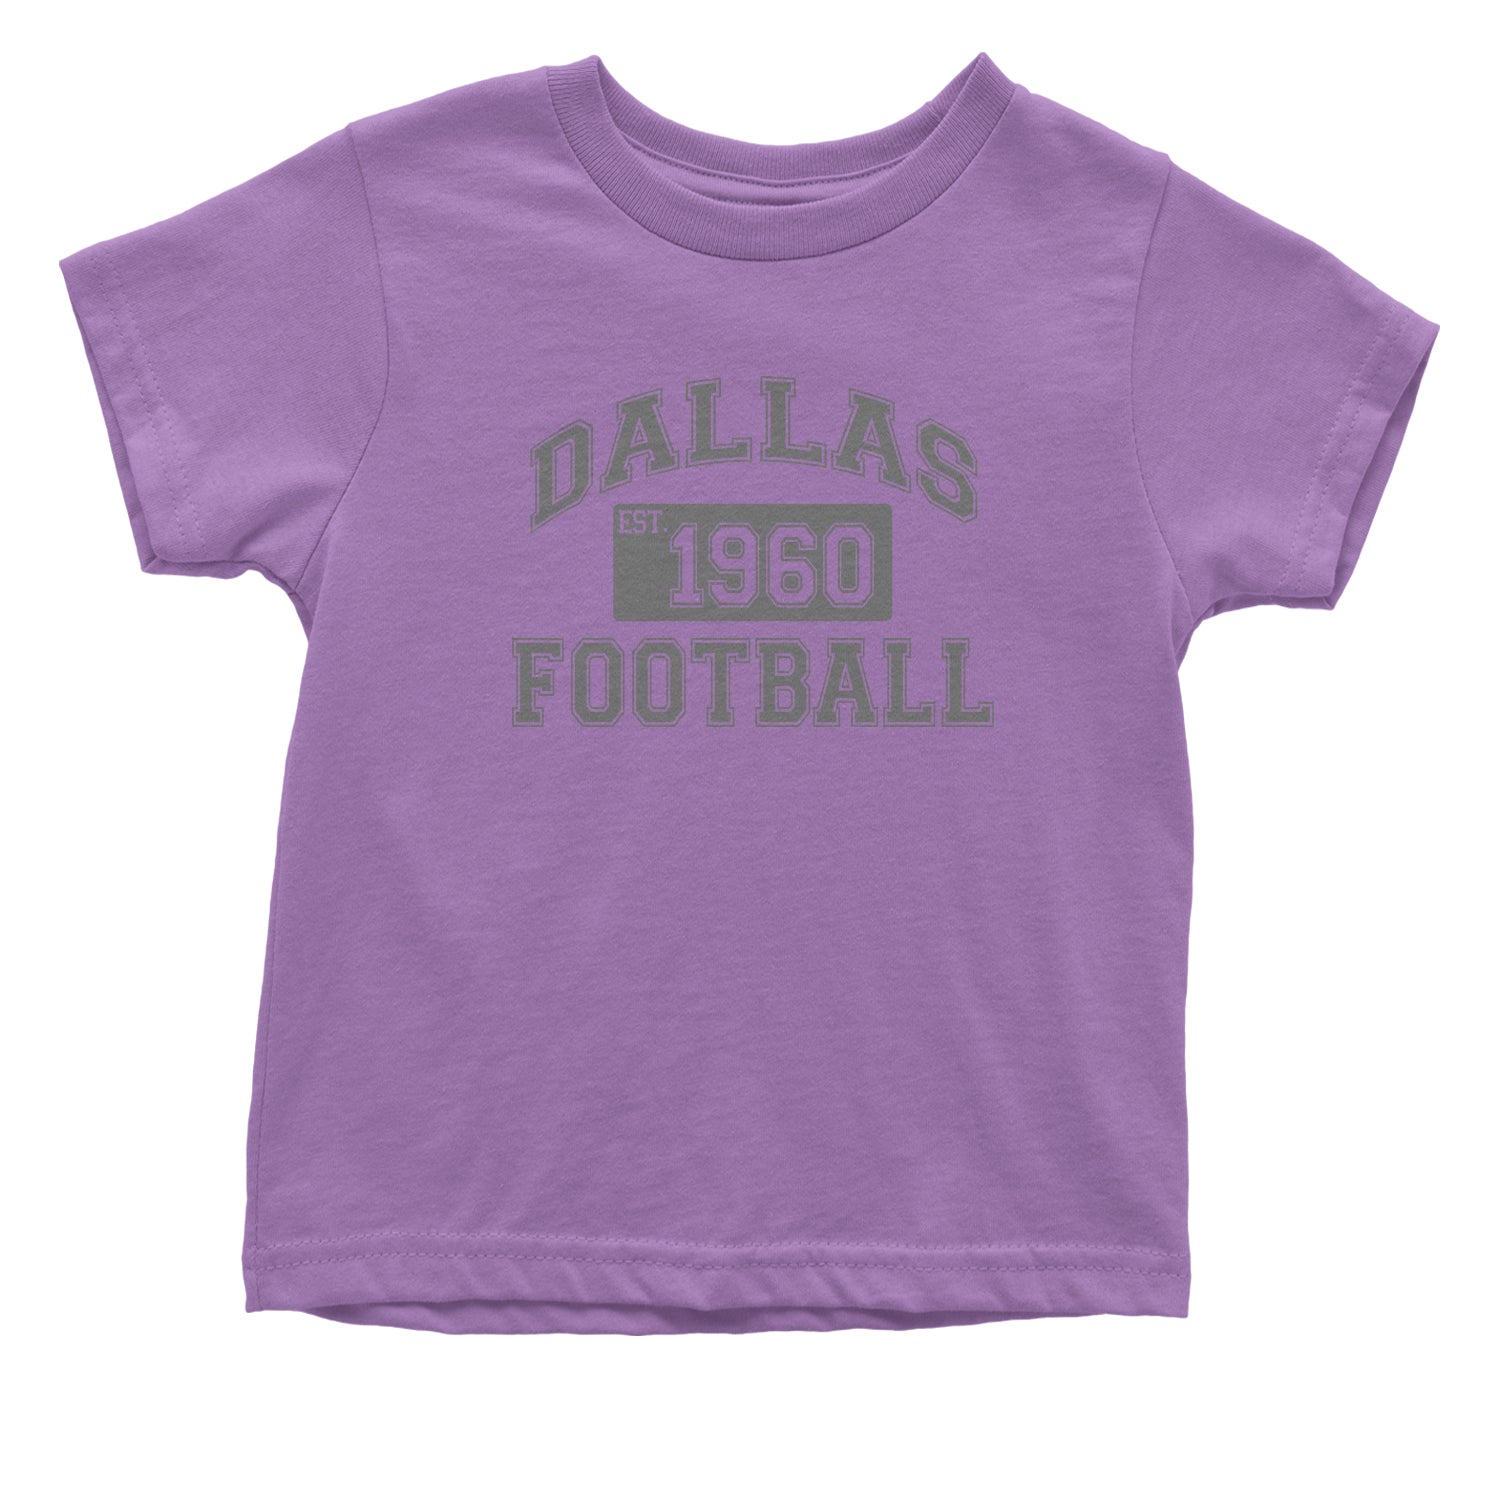 Dallas Football Established 1960 Infant One-Piece Romper Bodysuit and Toddler T-shirt boys, dem by Expression Tees